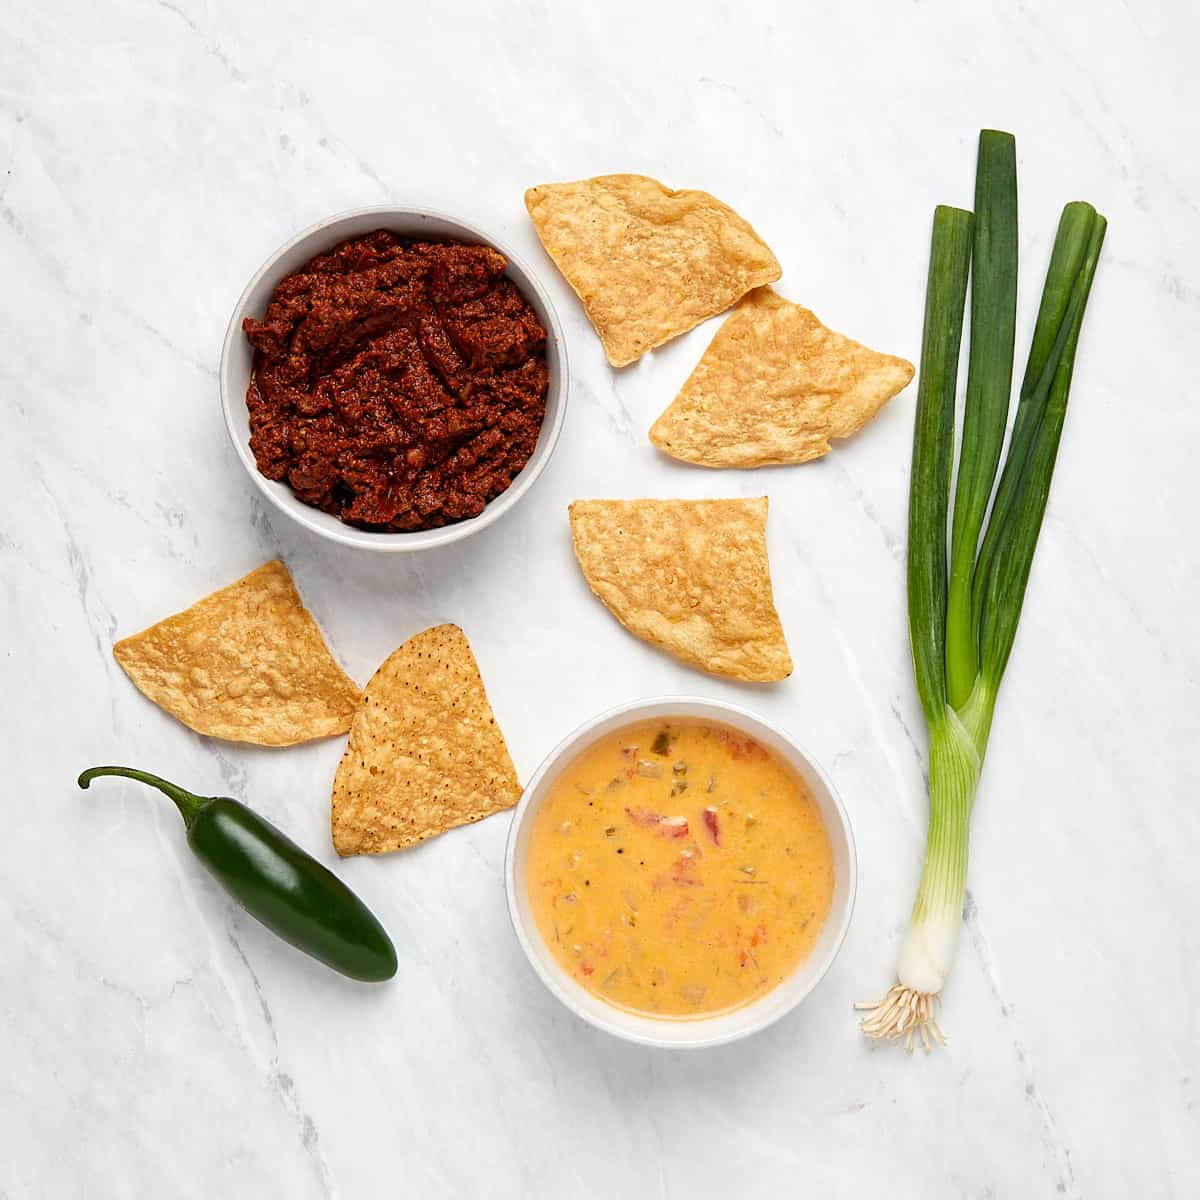 ingredients for chili cheese nachos.